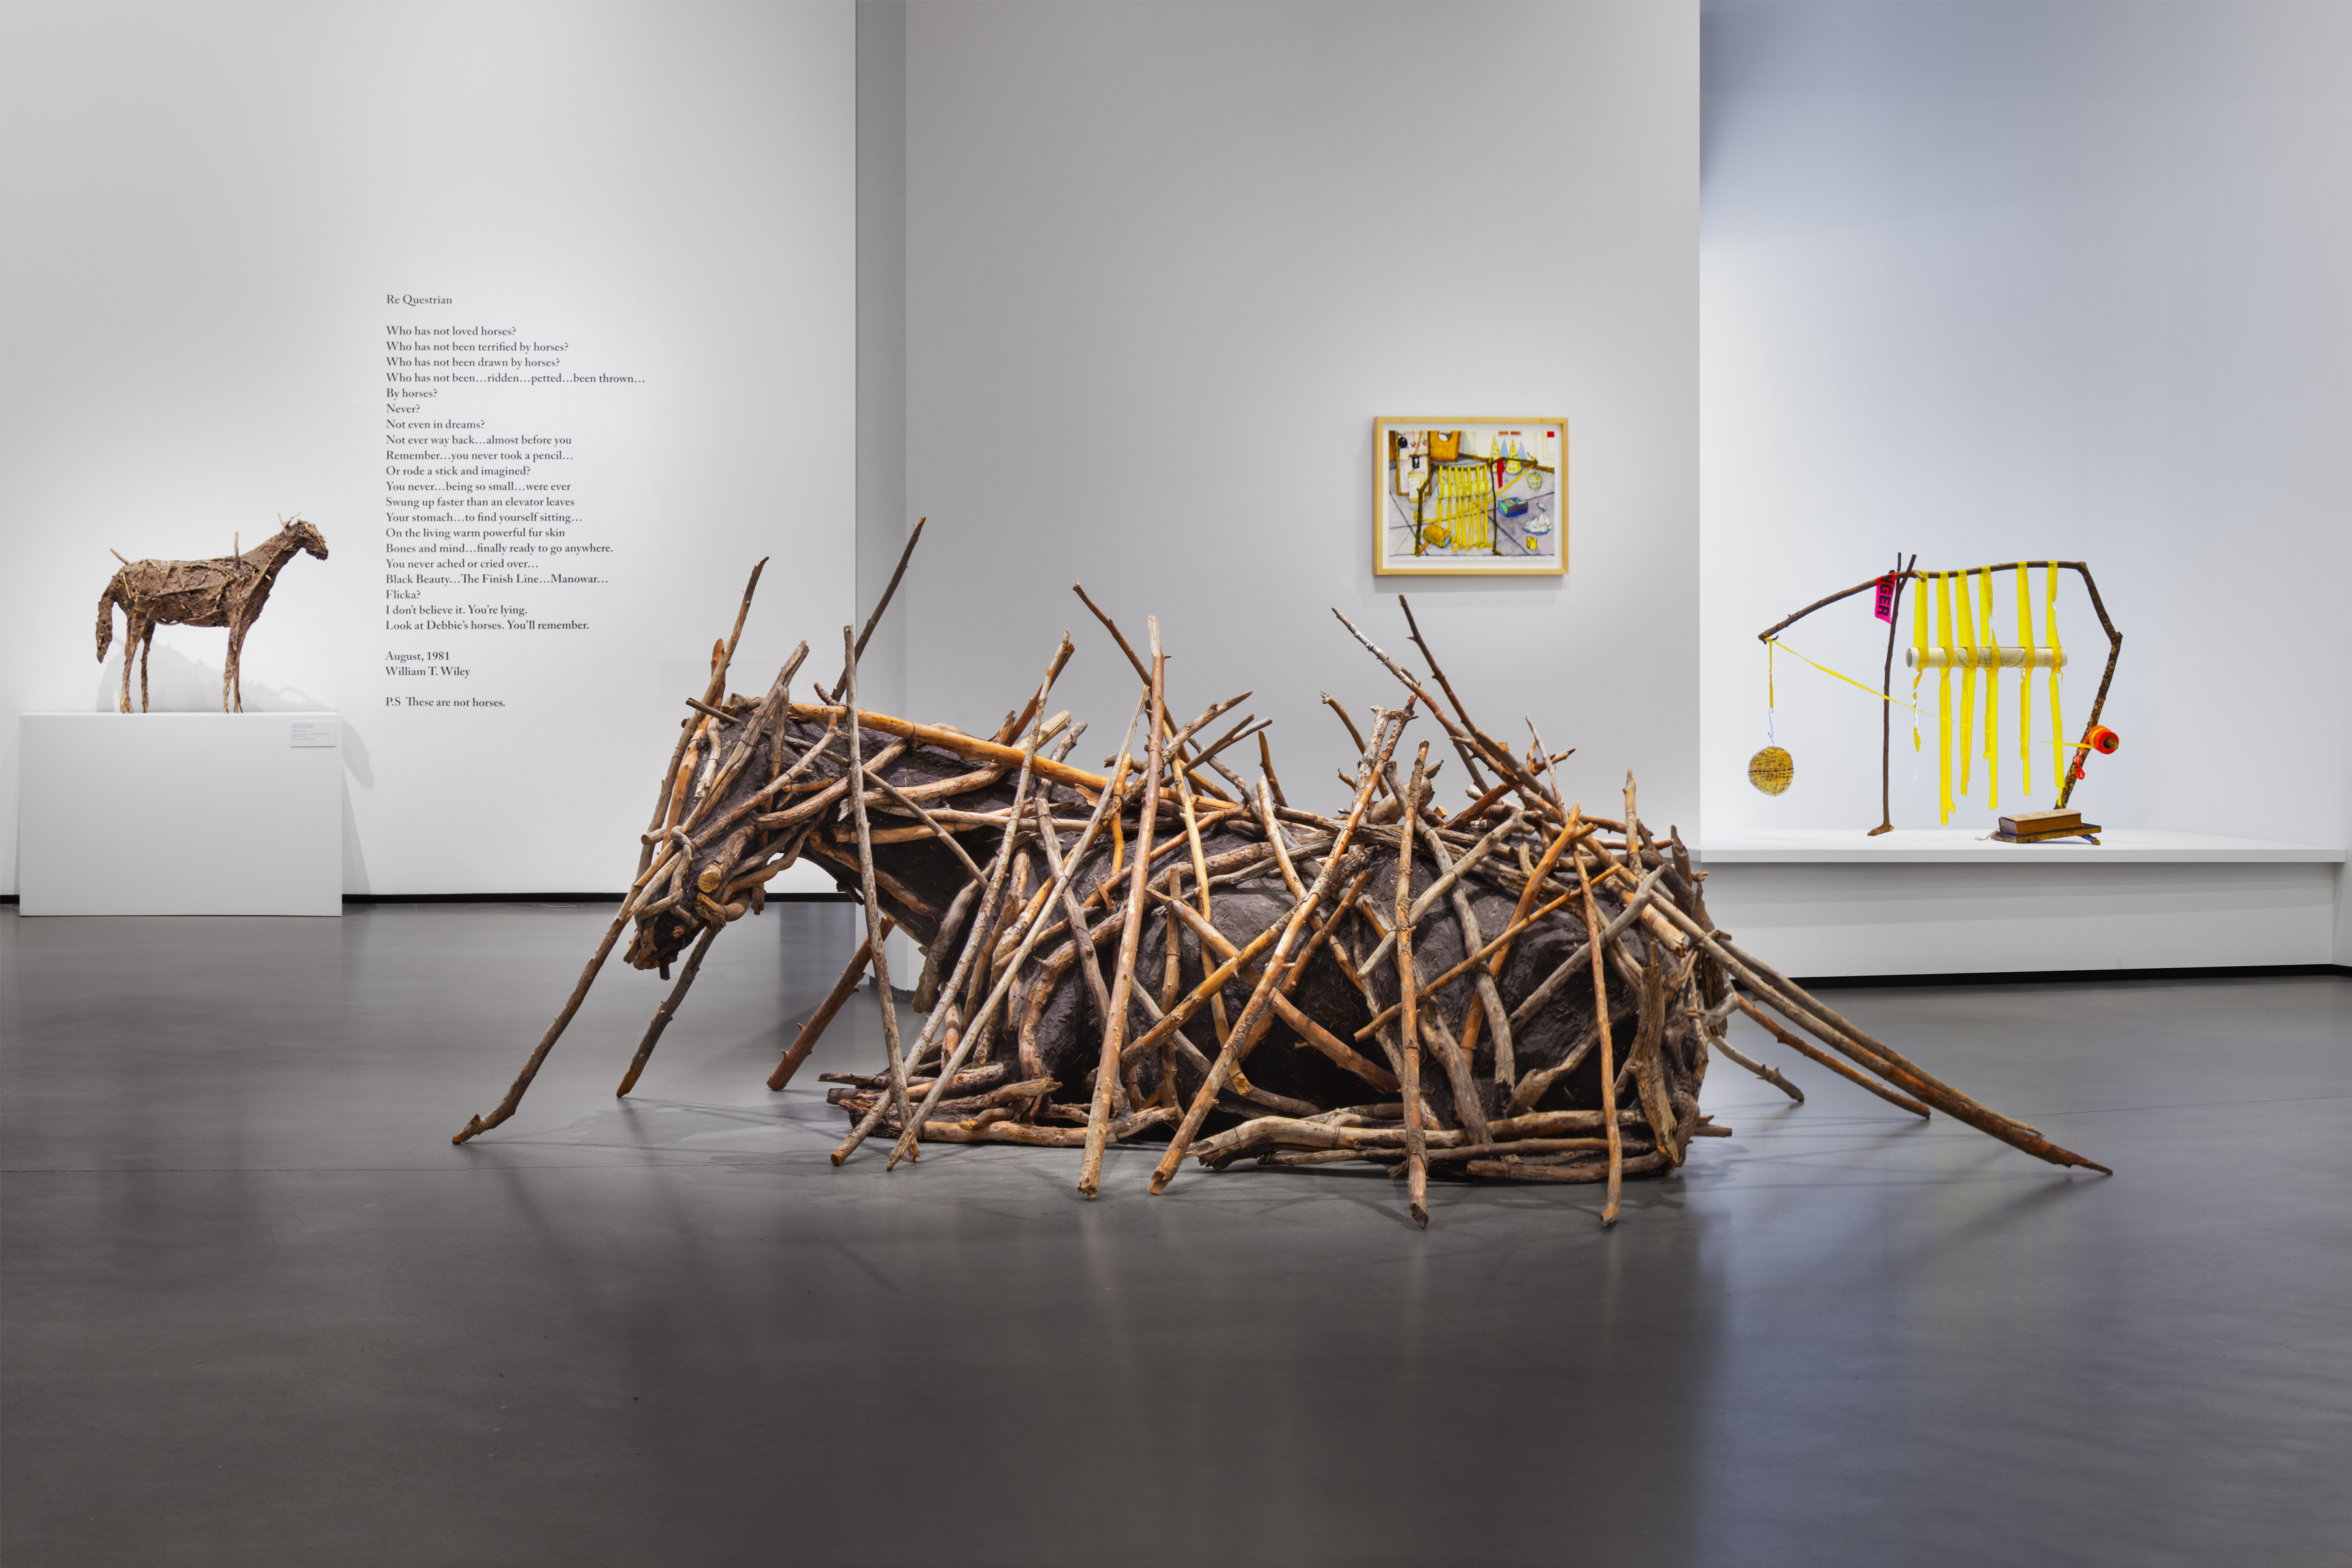 Installation image of horses by Deborah Butterfield and William T. Wiley.